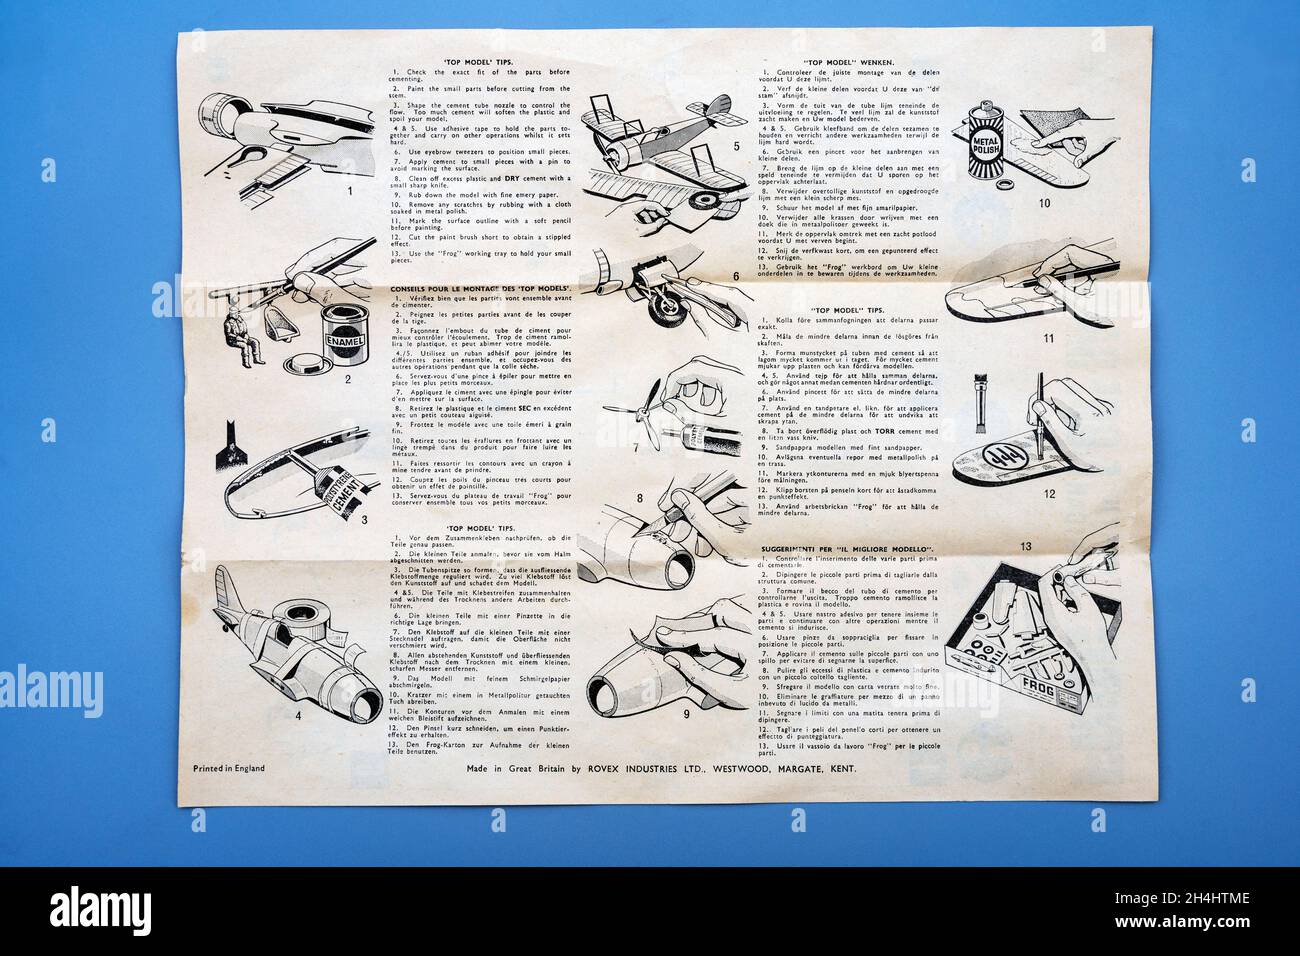 Vintage instruction leaflet for a plastic model kit manufactured by Rovex Industries Ltd Stock Photo